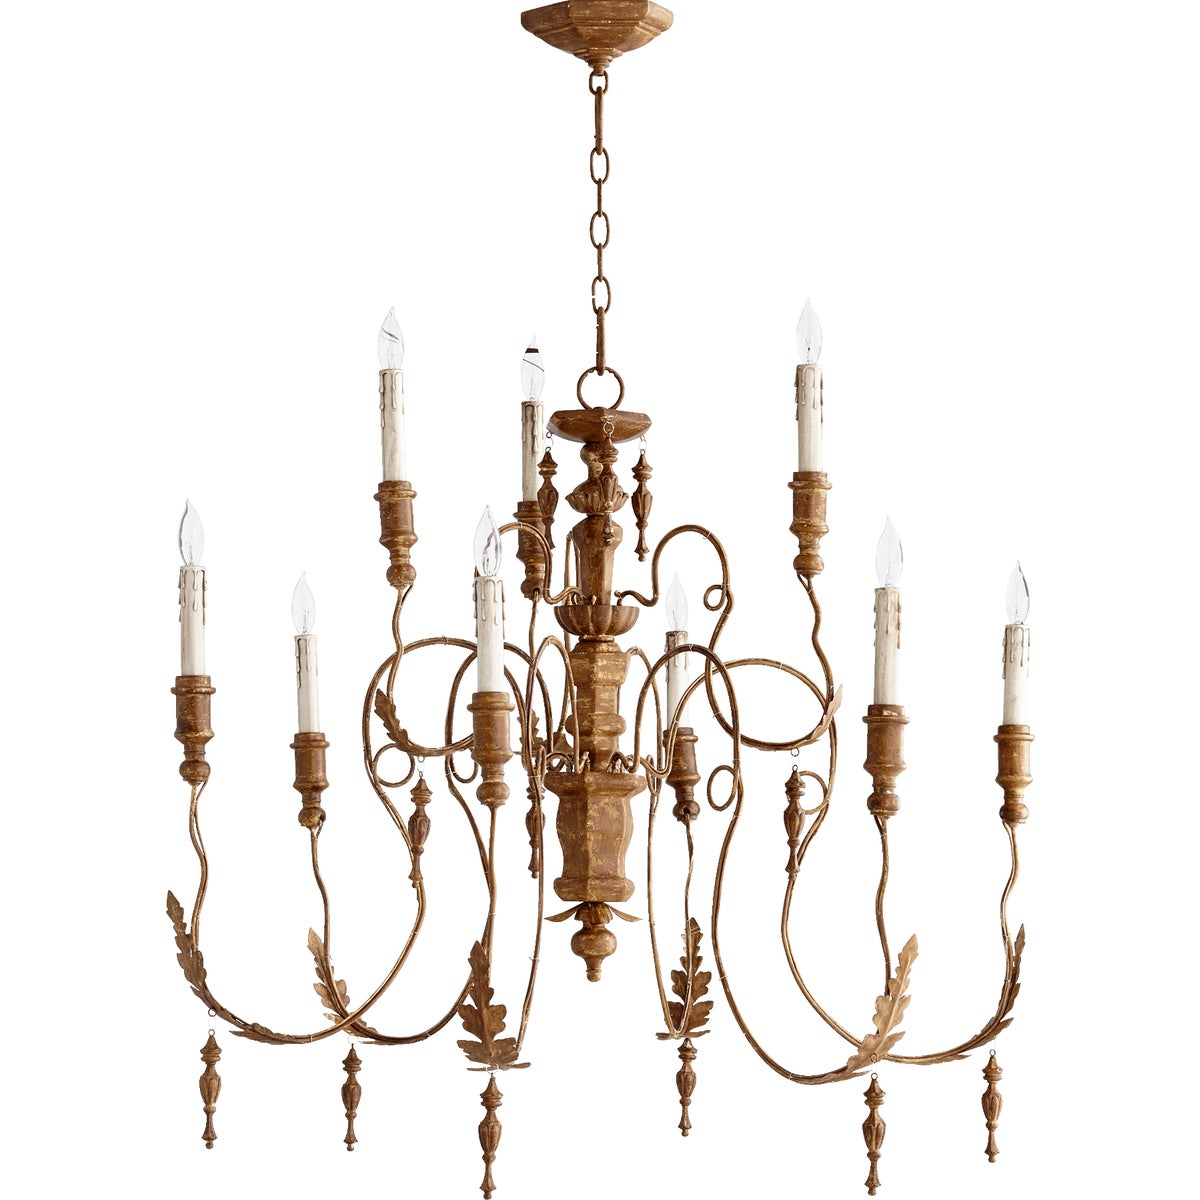 Italian Chandelier with candlestick-styled lights, leaf motifs, and imperfect asymmetry, celebrating the region&#39;s rich history of Baroque and Rococo architecture.